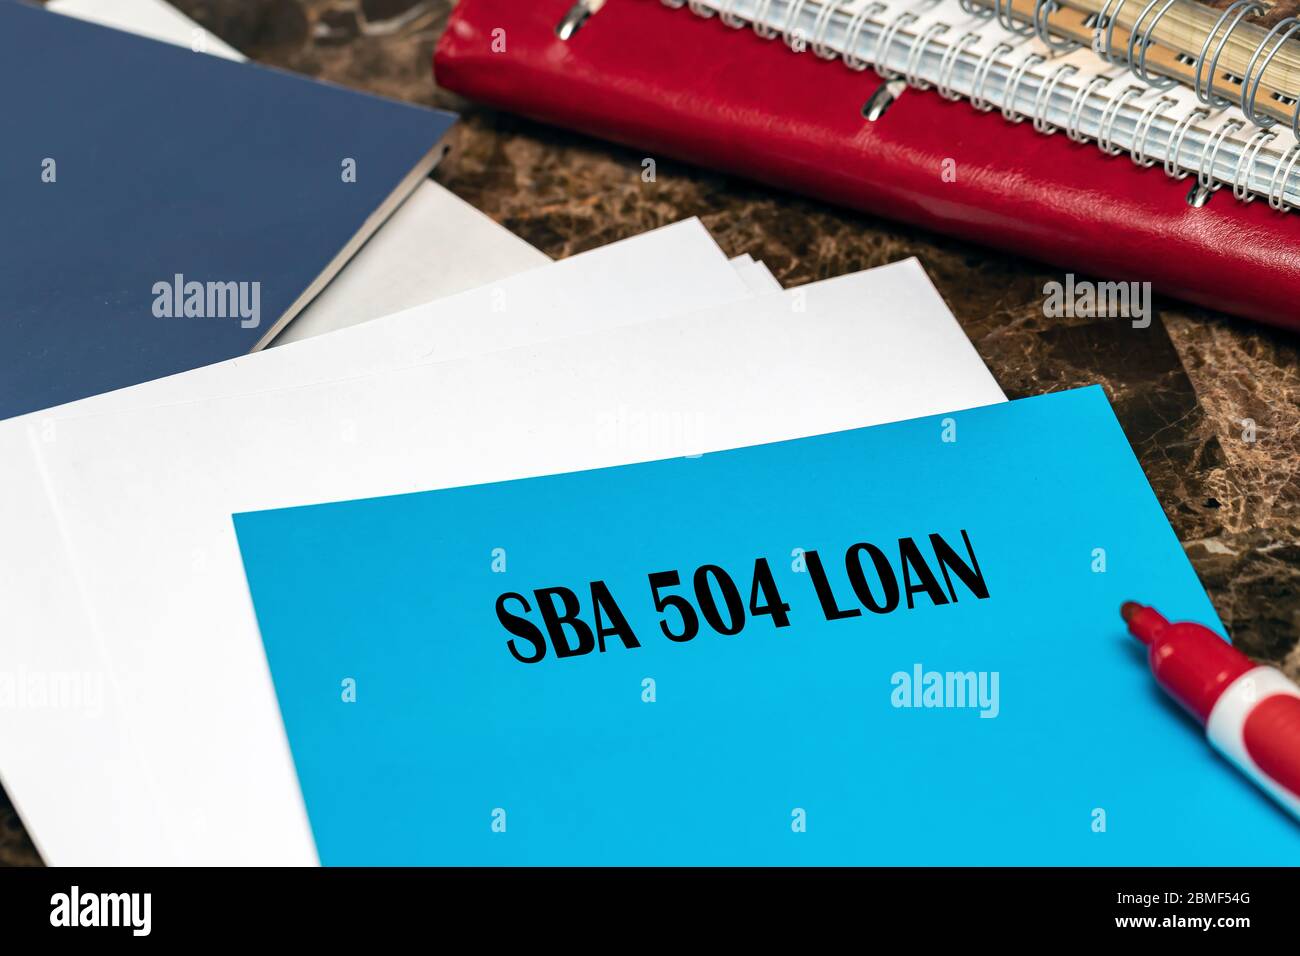 SBA 504 loans provide long-term financing for small businesses to purchase real estate, equipment, and other fixed assets. Stock Photo